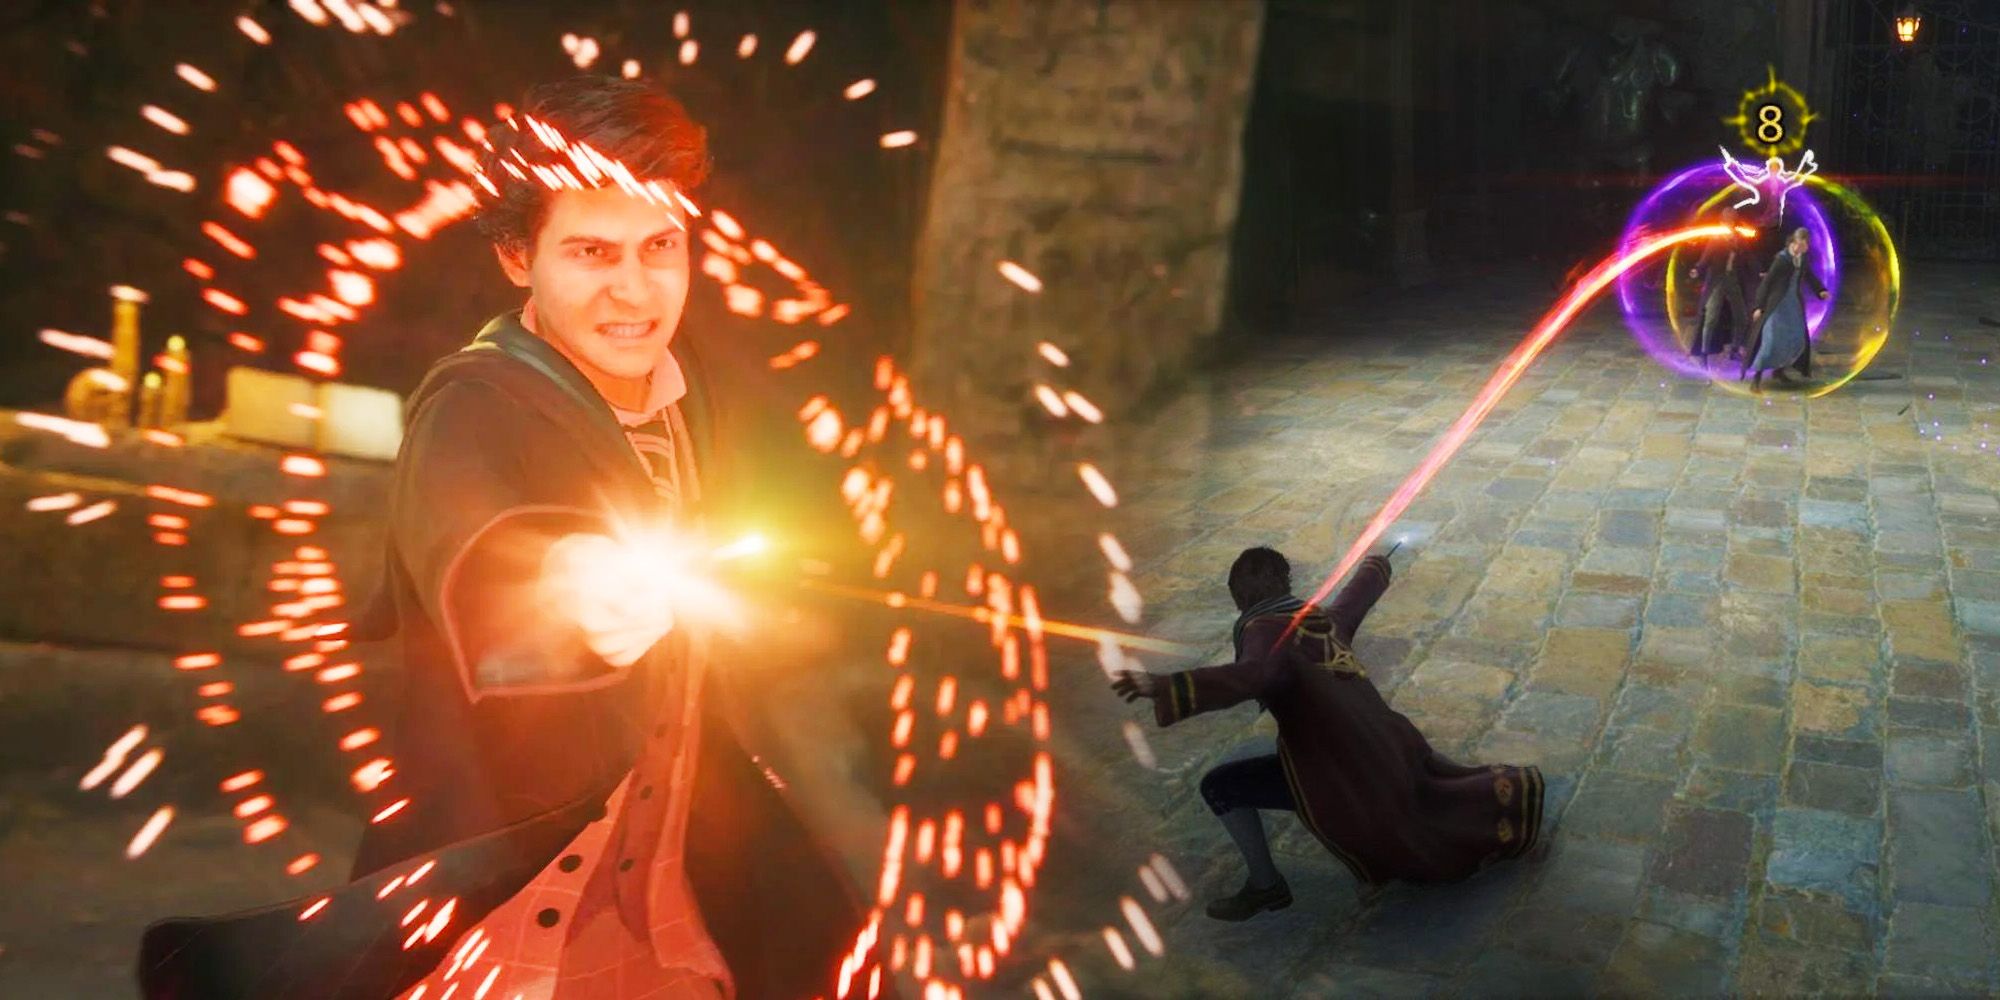 Hogwarts Legacy image of Sebastian casting a spell on the left while on the right a player shoots a spell at a group of students during duels